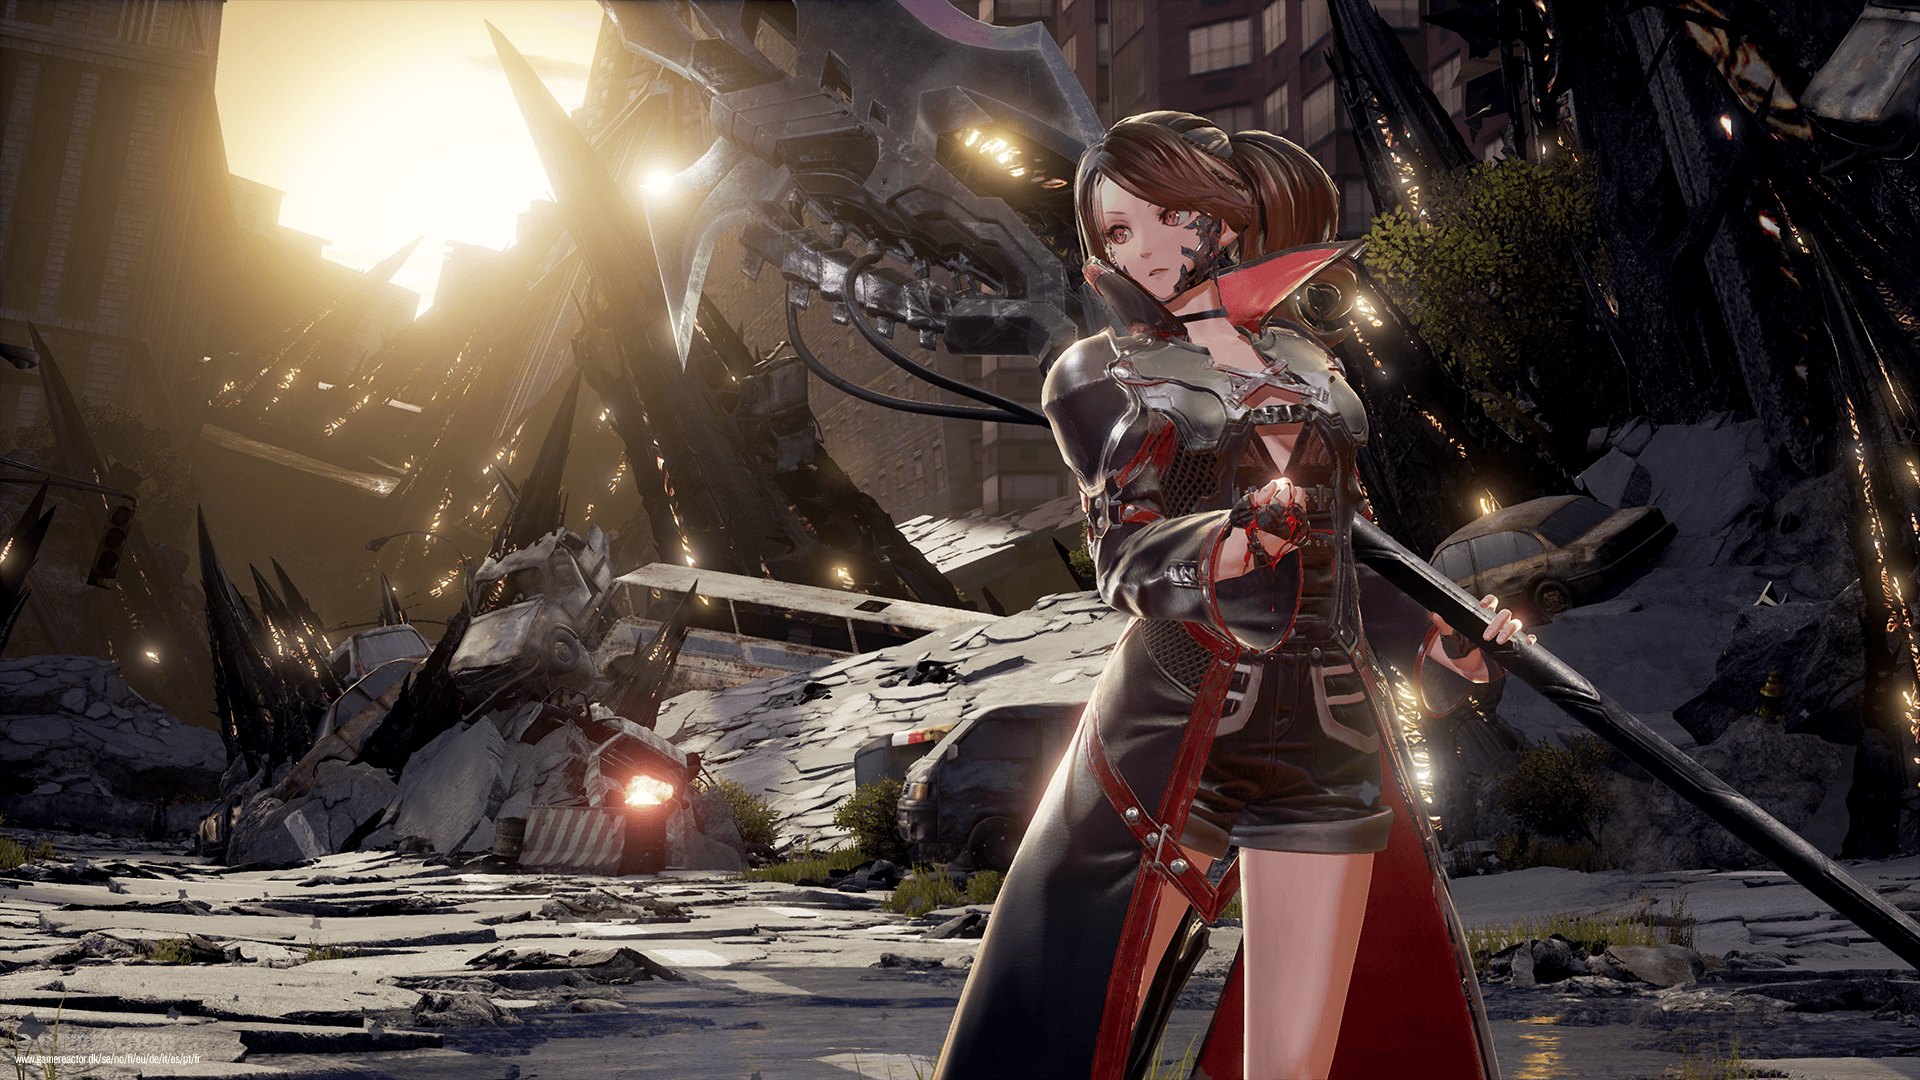 Bandai Namco are considering multiplayer for Code Vein